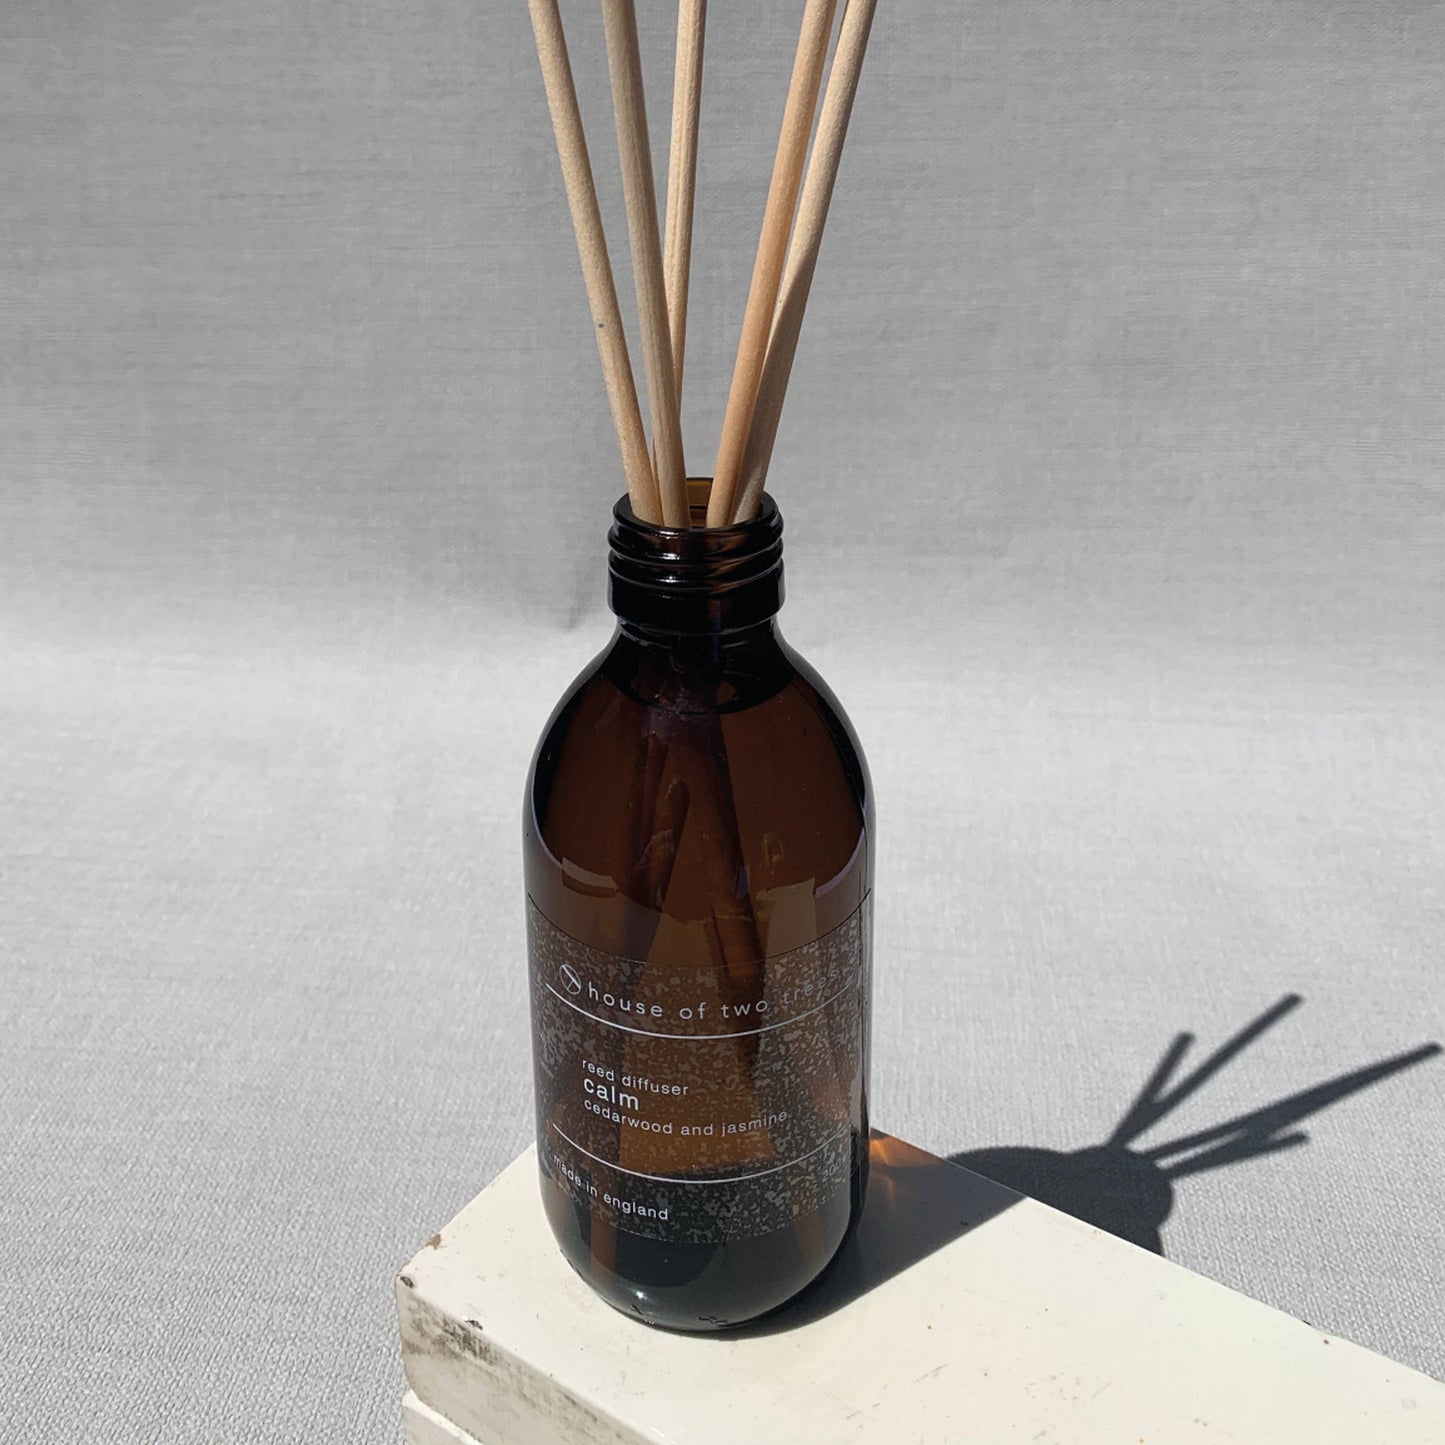 House of Two Trees Calm Reed Diffuser - Cedarwood & Jasmine